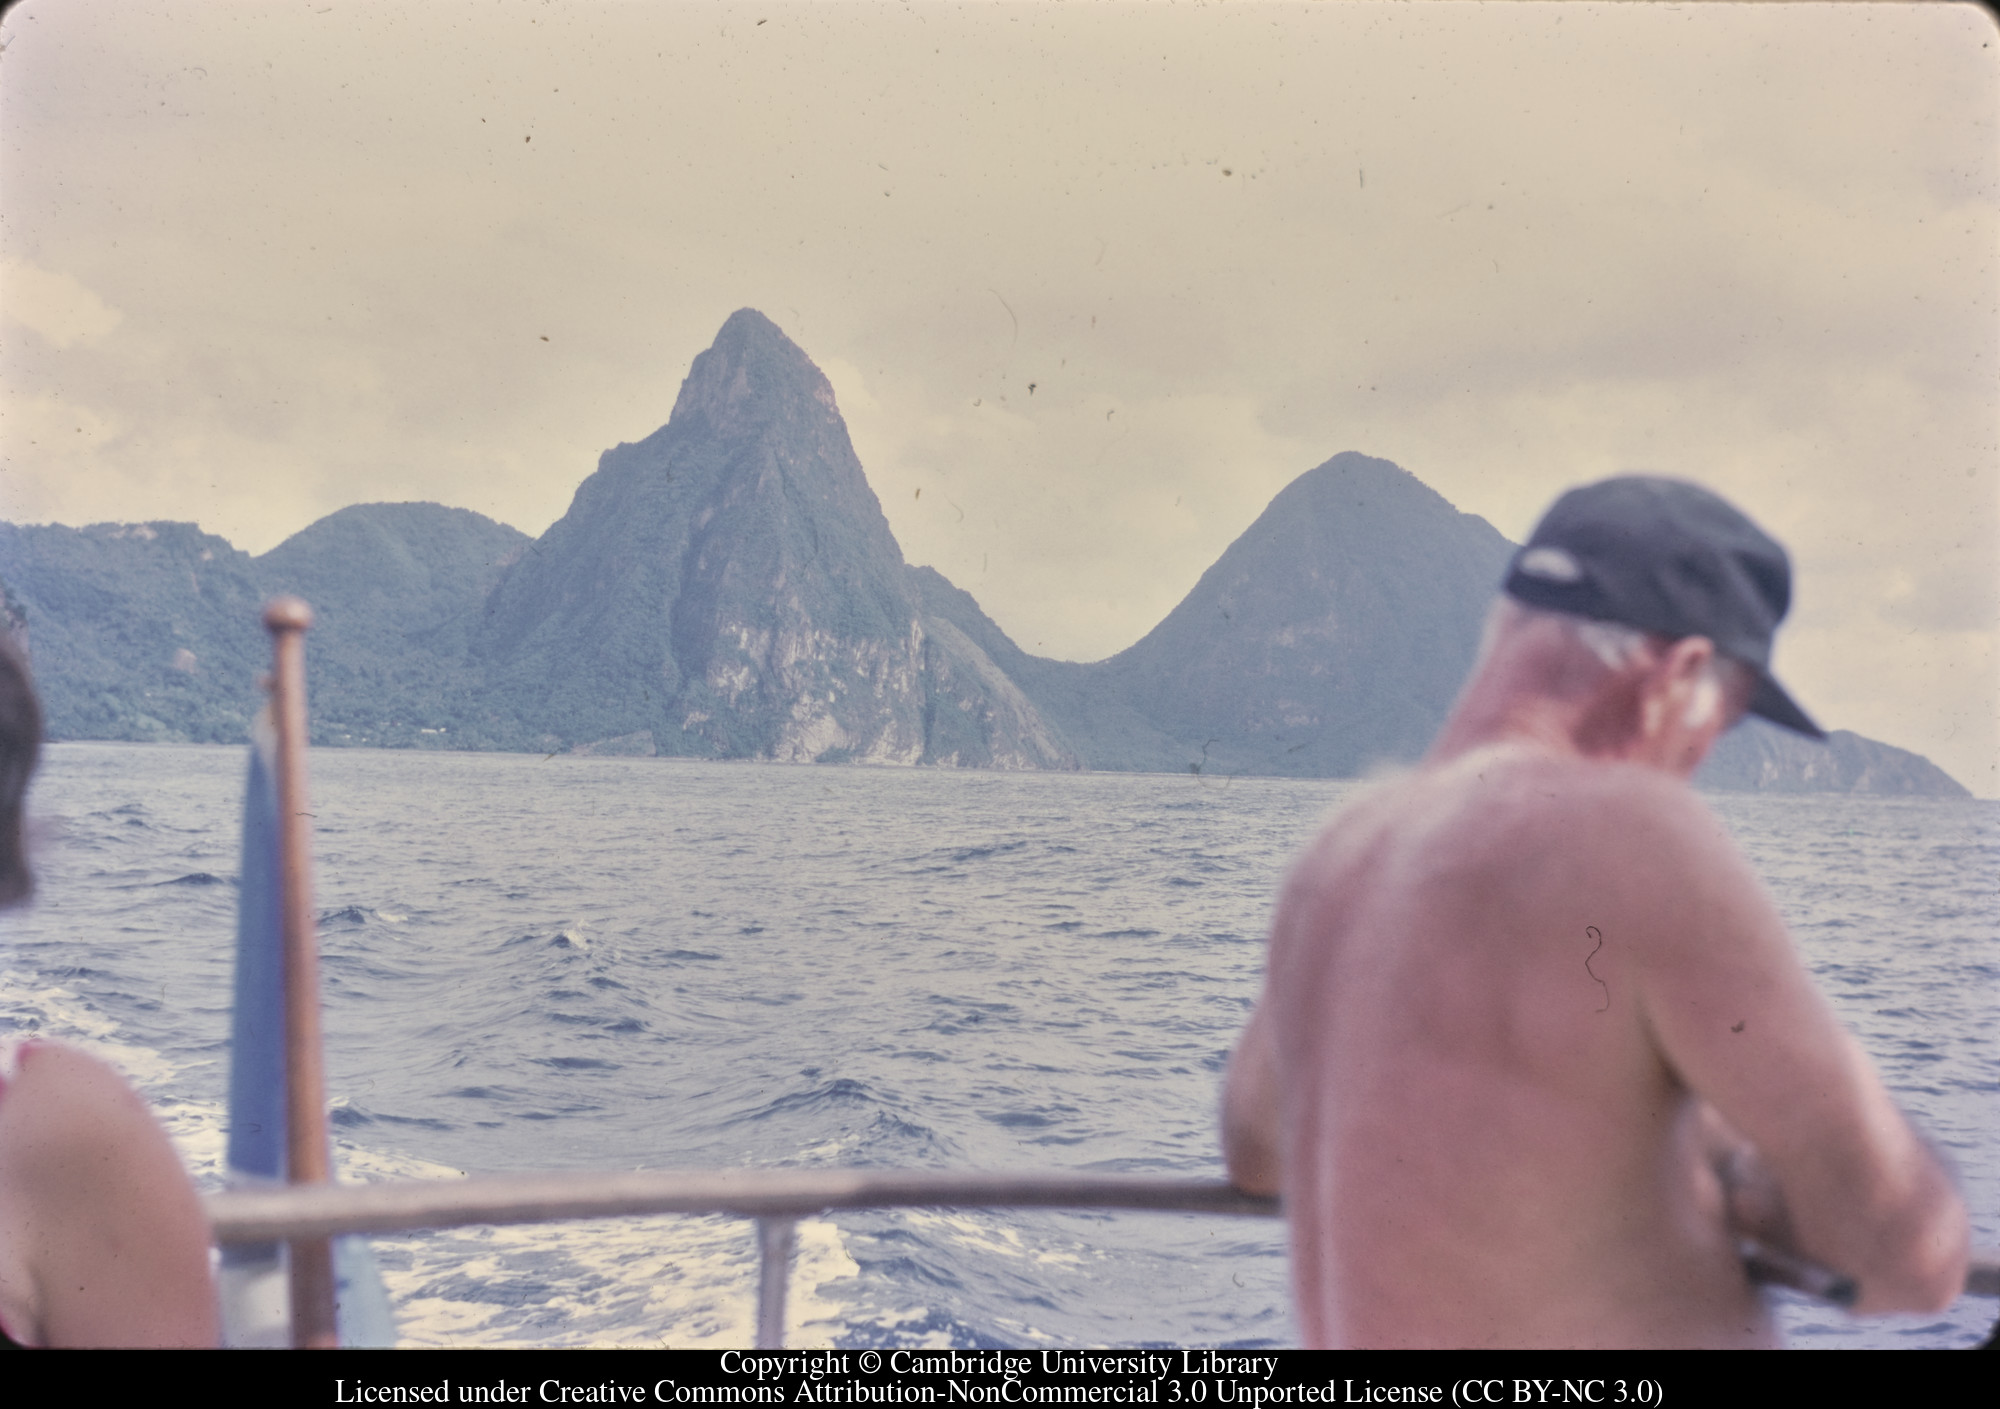 Maurice Salles - Miquelle off Pitons, 1972-10